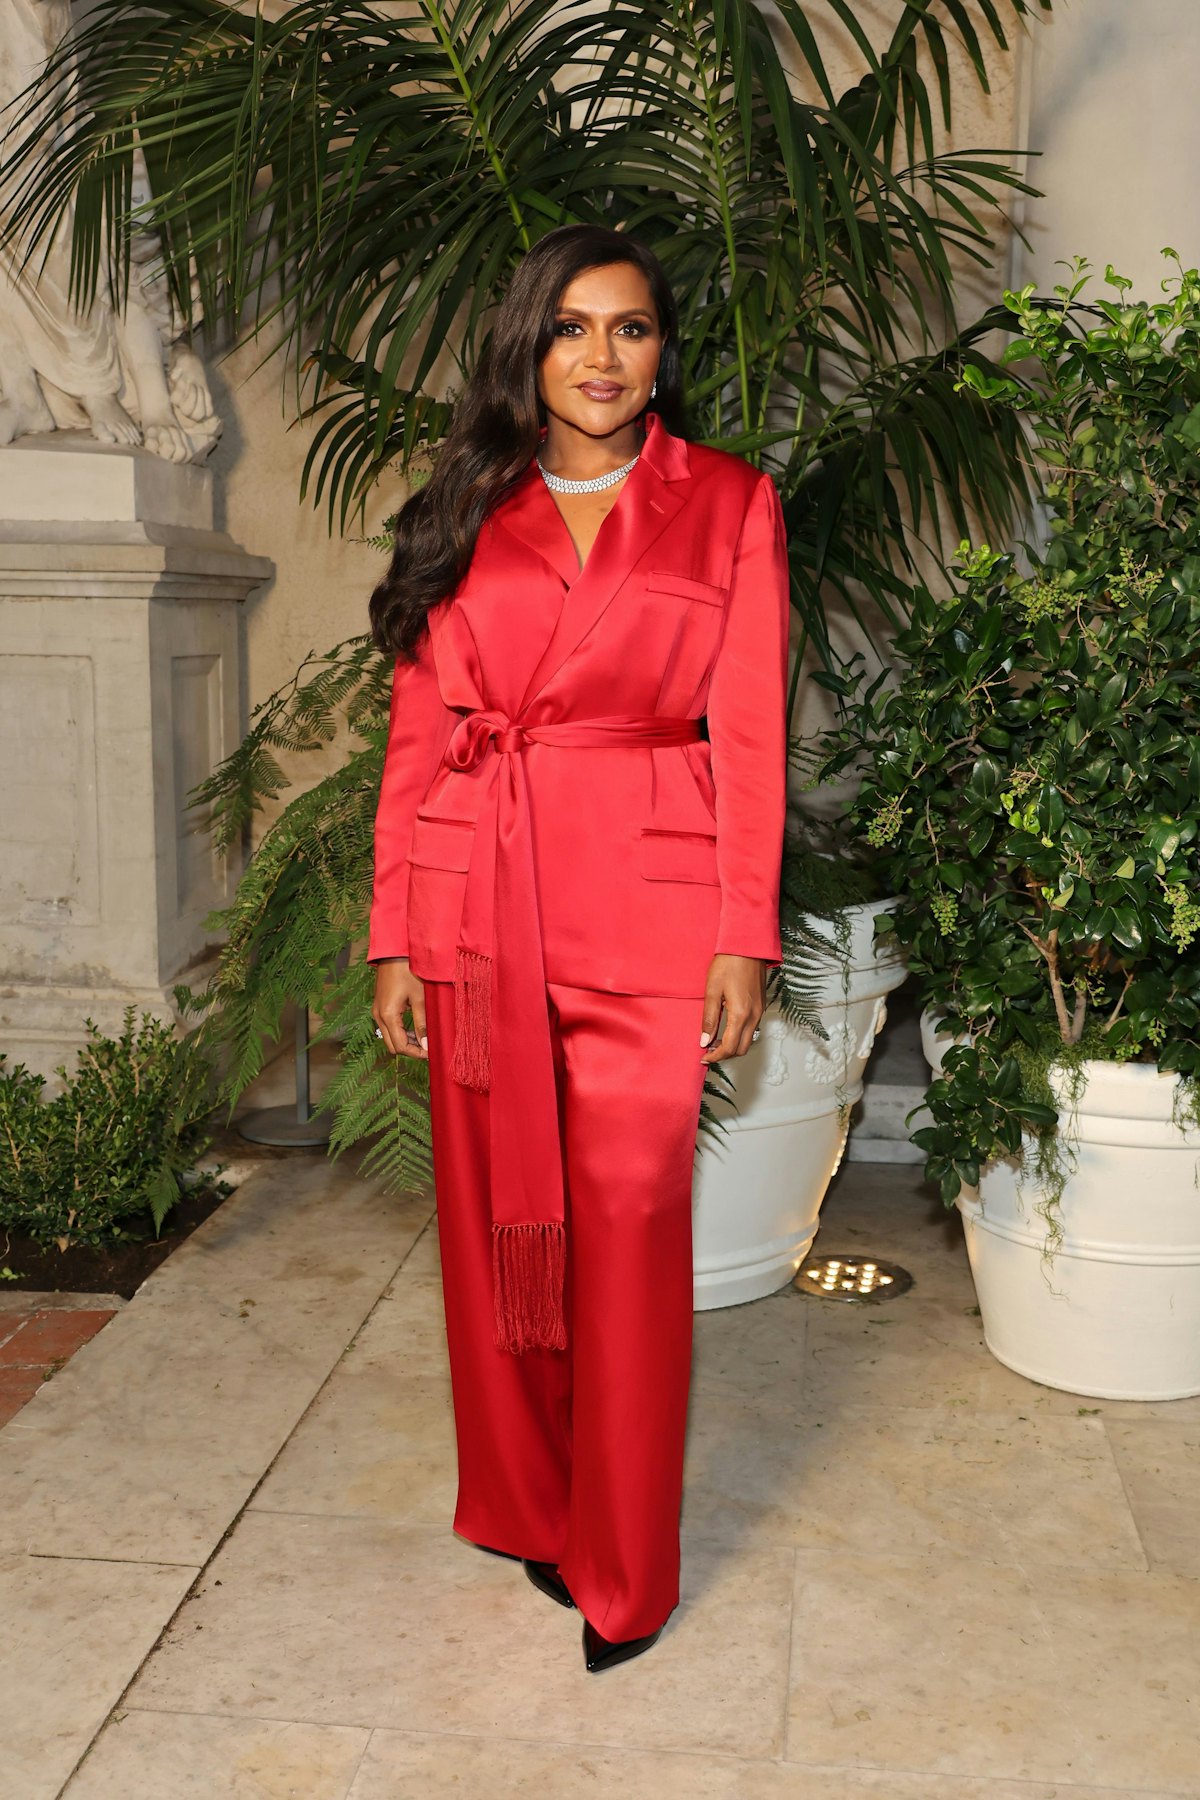 Mindy Kaling attends the Ralph Lauren SS23 Runway Show at The Huntington Library, Art Collections, a...